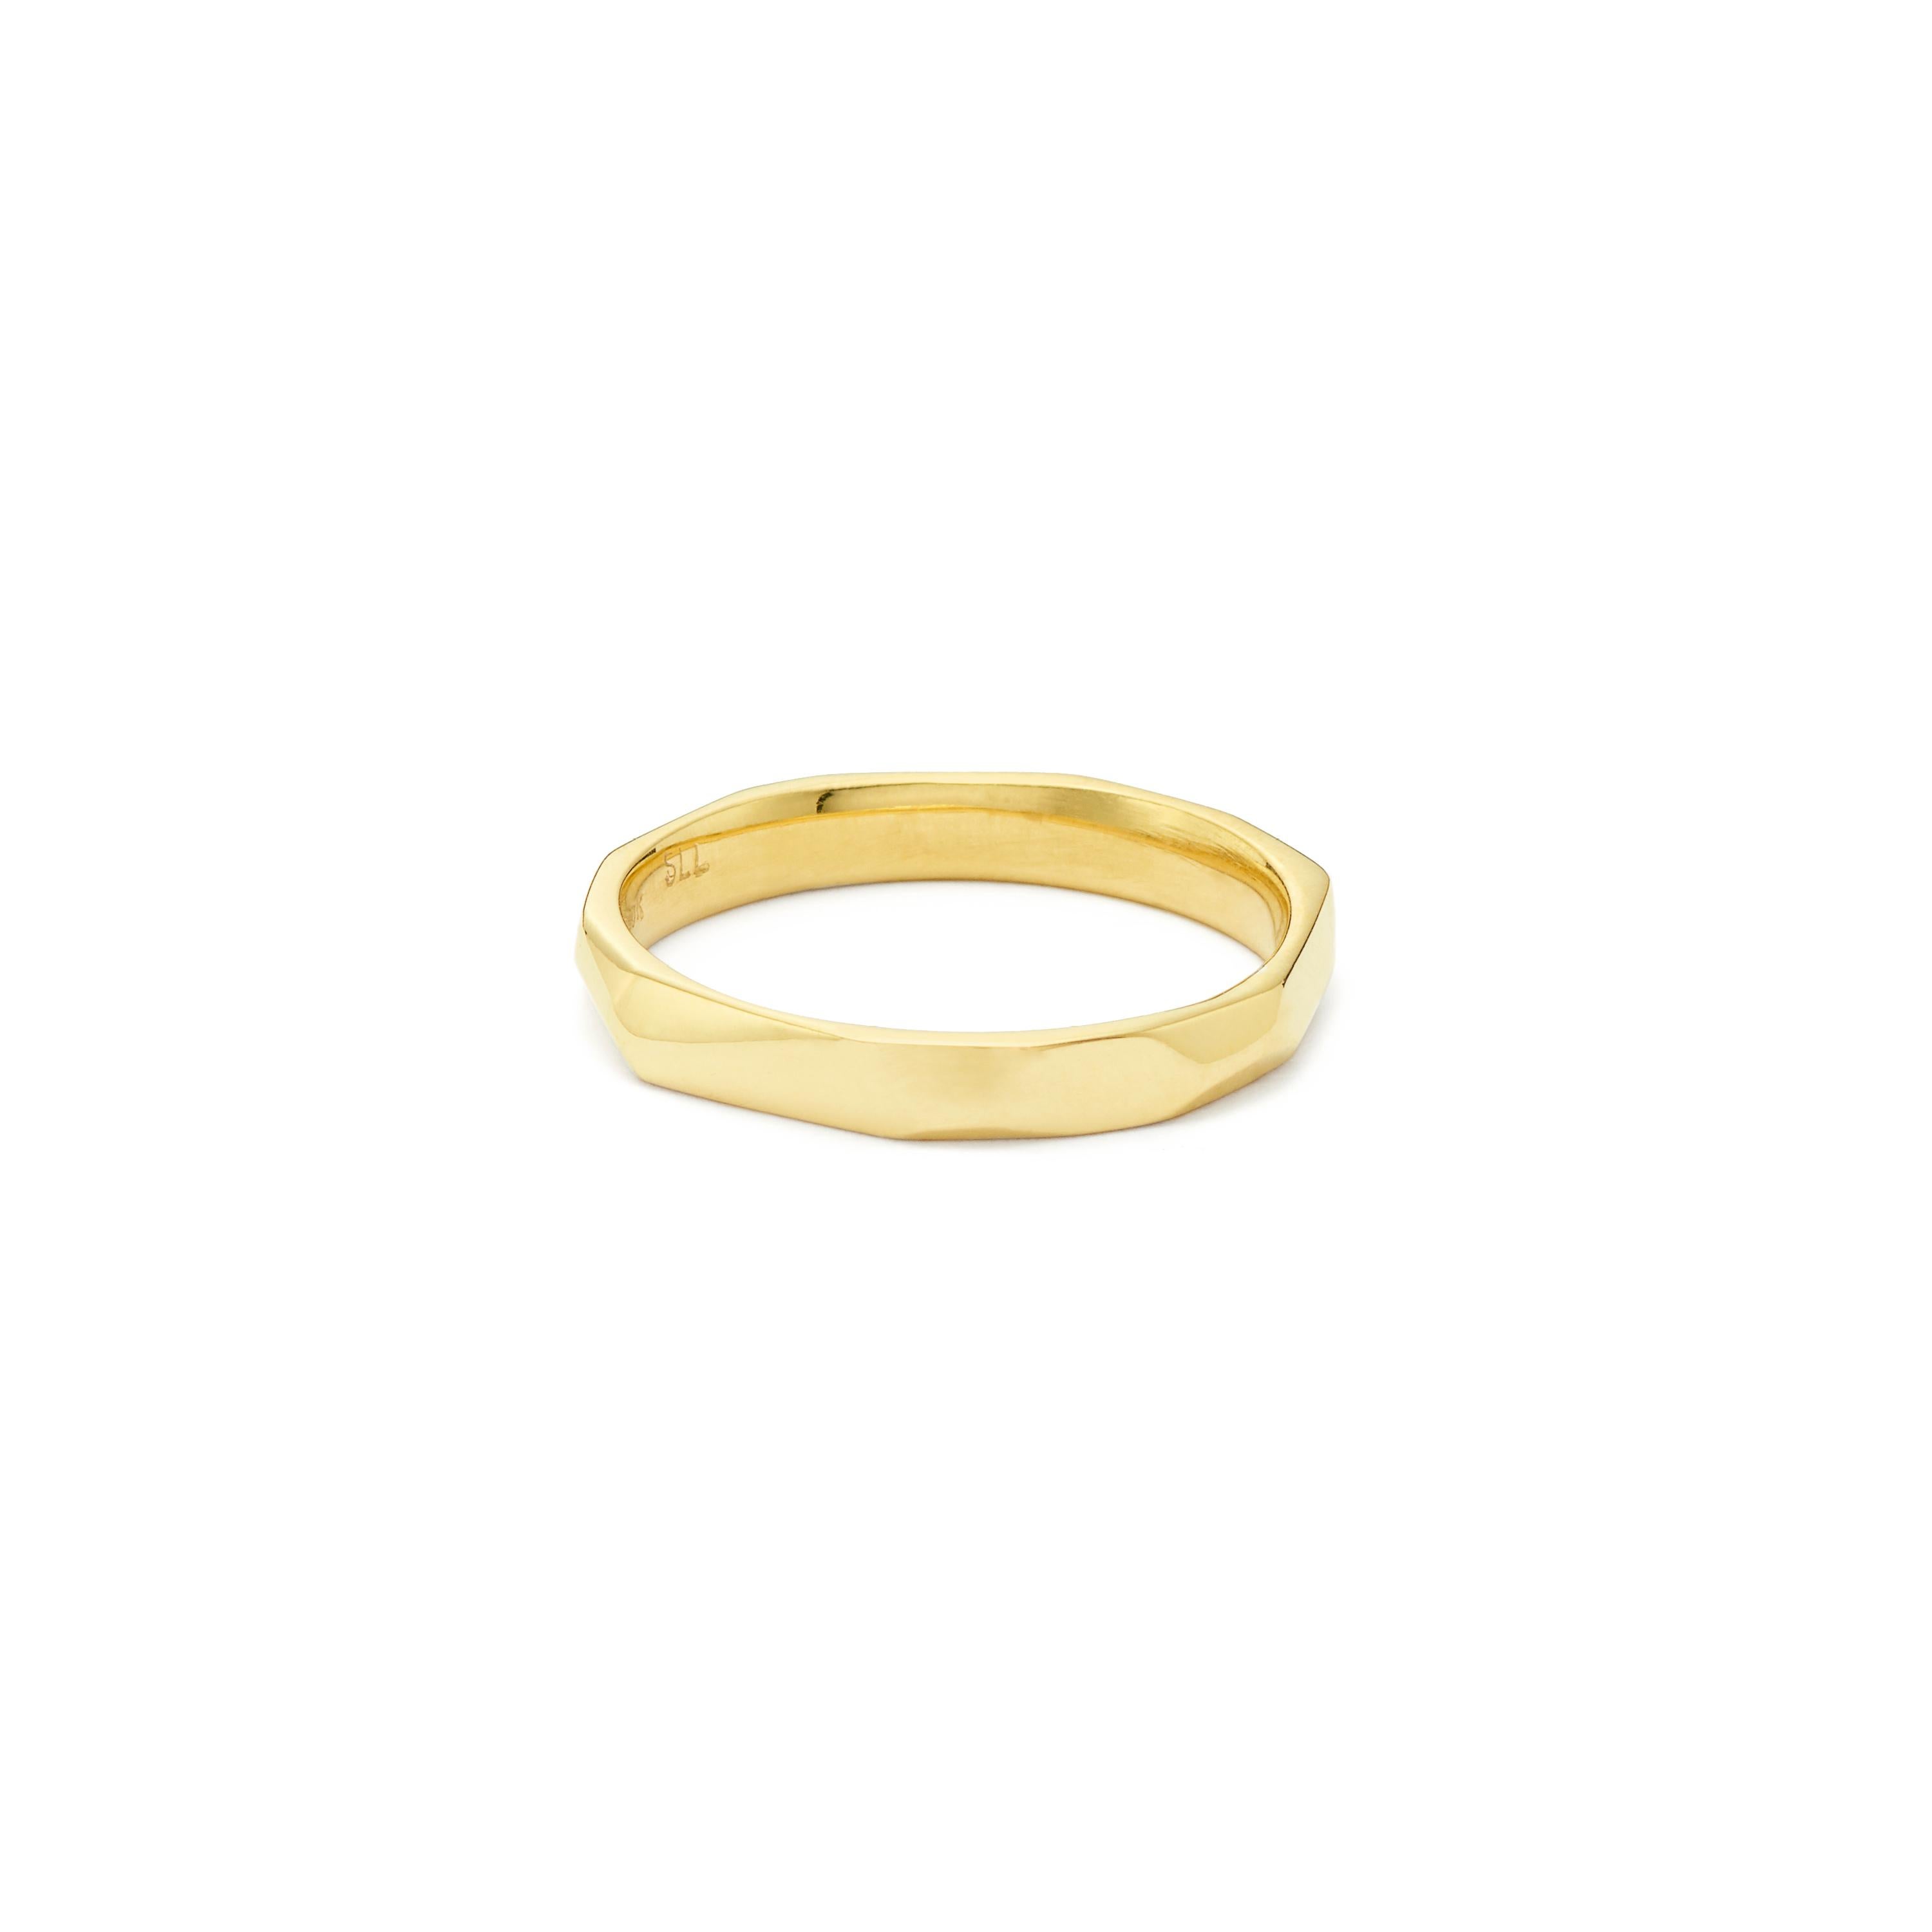 A modern take on the simple gold ring, Ben’s Band in 18 Karat Yellow Gold, is a popular wedding band.

Also available in 18 Karat White Gold or 18 Karat White Gold with Diamonds.

*Ring can be sized for a custom fit.
